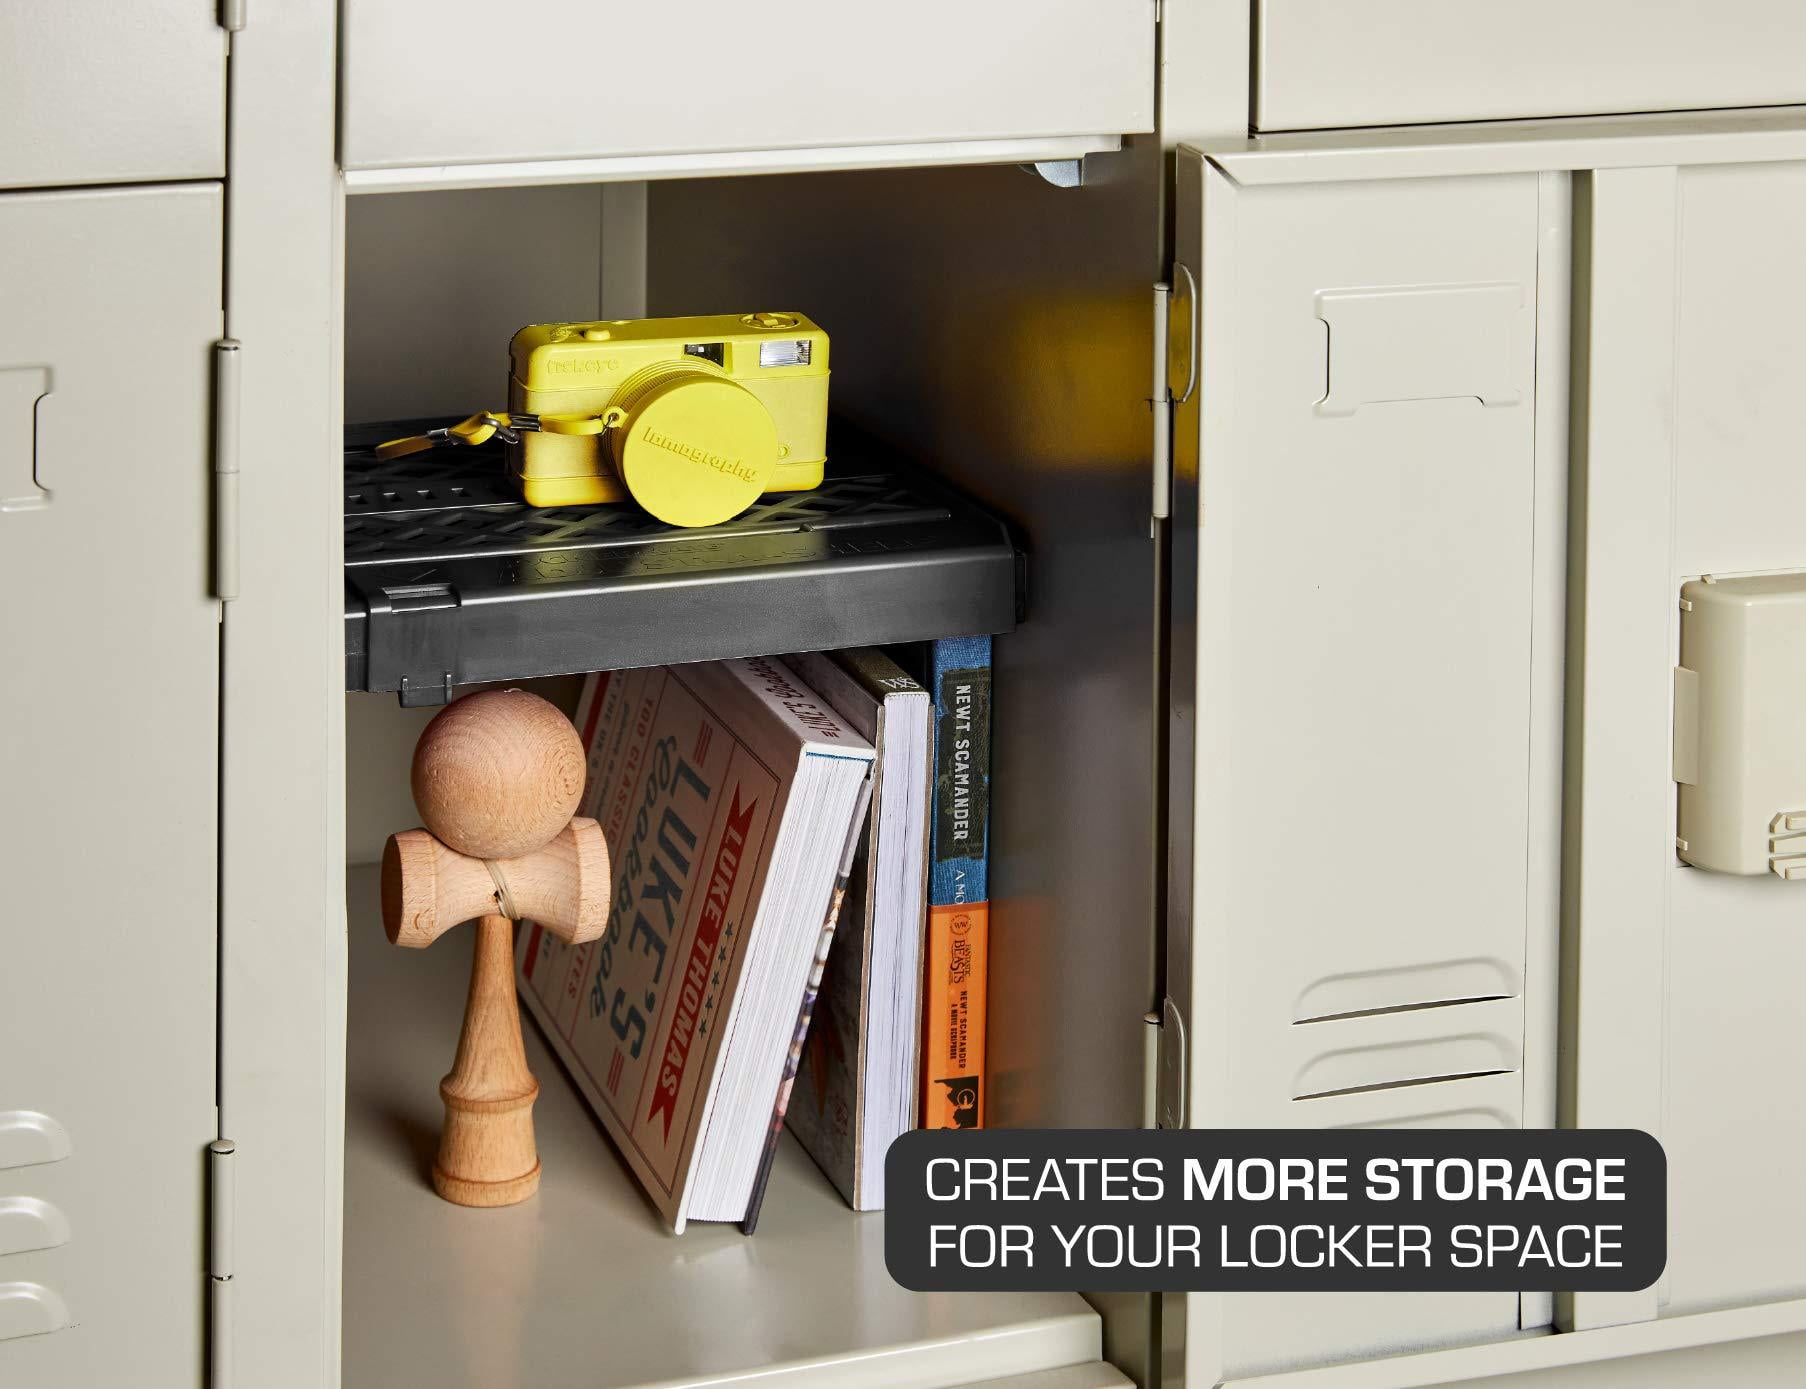 Buy the best racking, lockers, cabinets and shelving – NEXTLEVEL